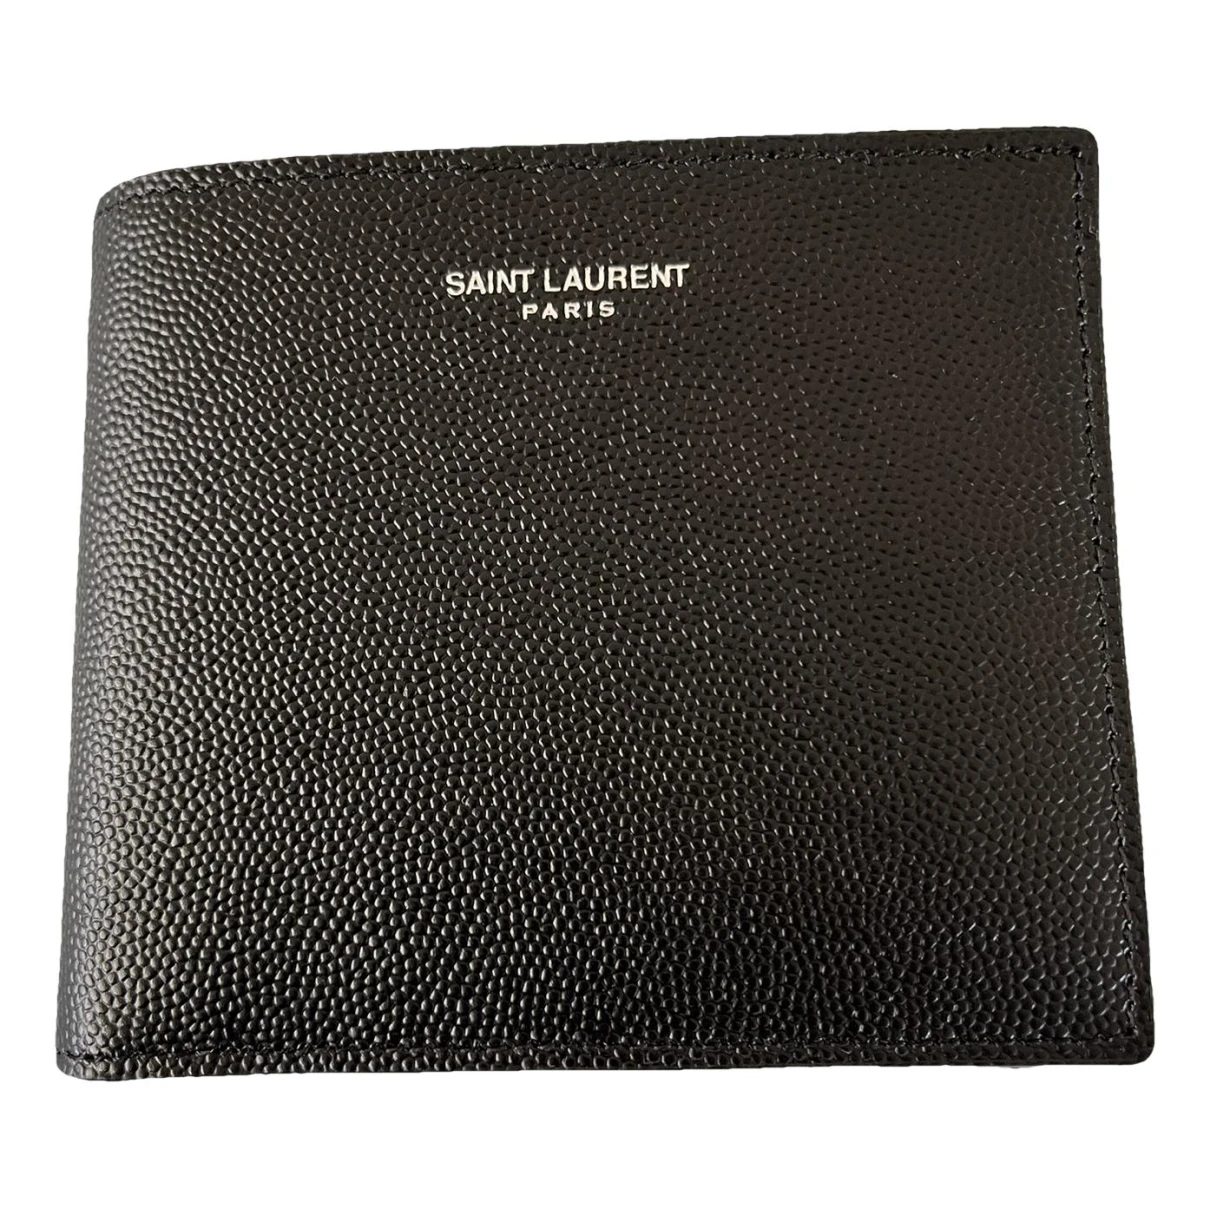 bags Saint Laurent small bags, wallets & cases for Male Leather. Used condition